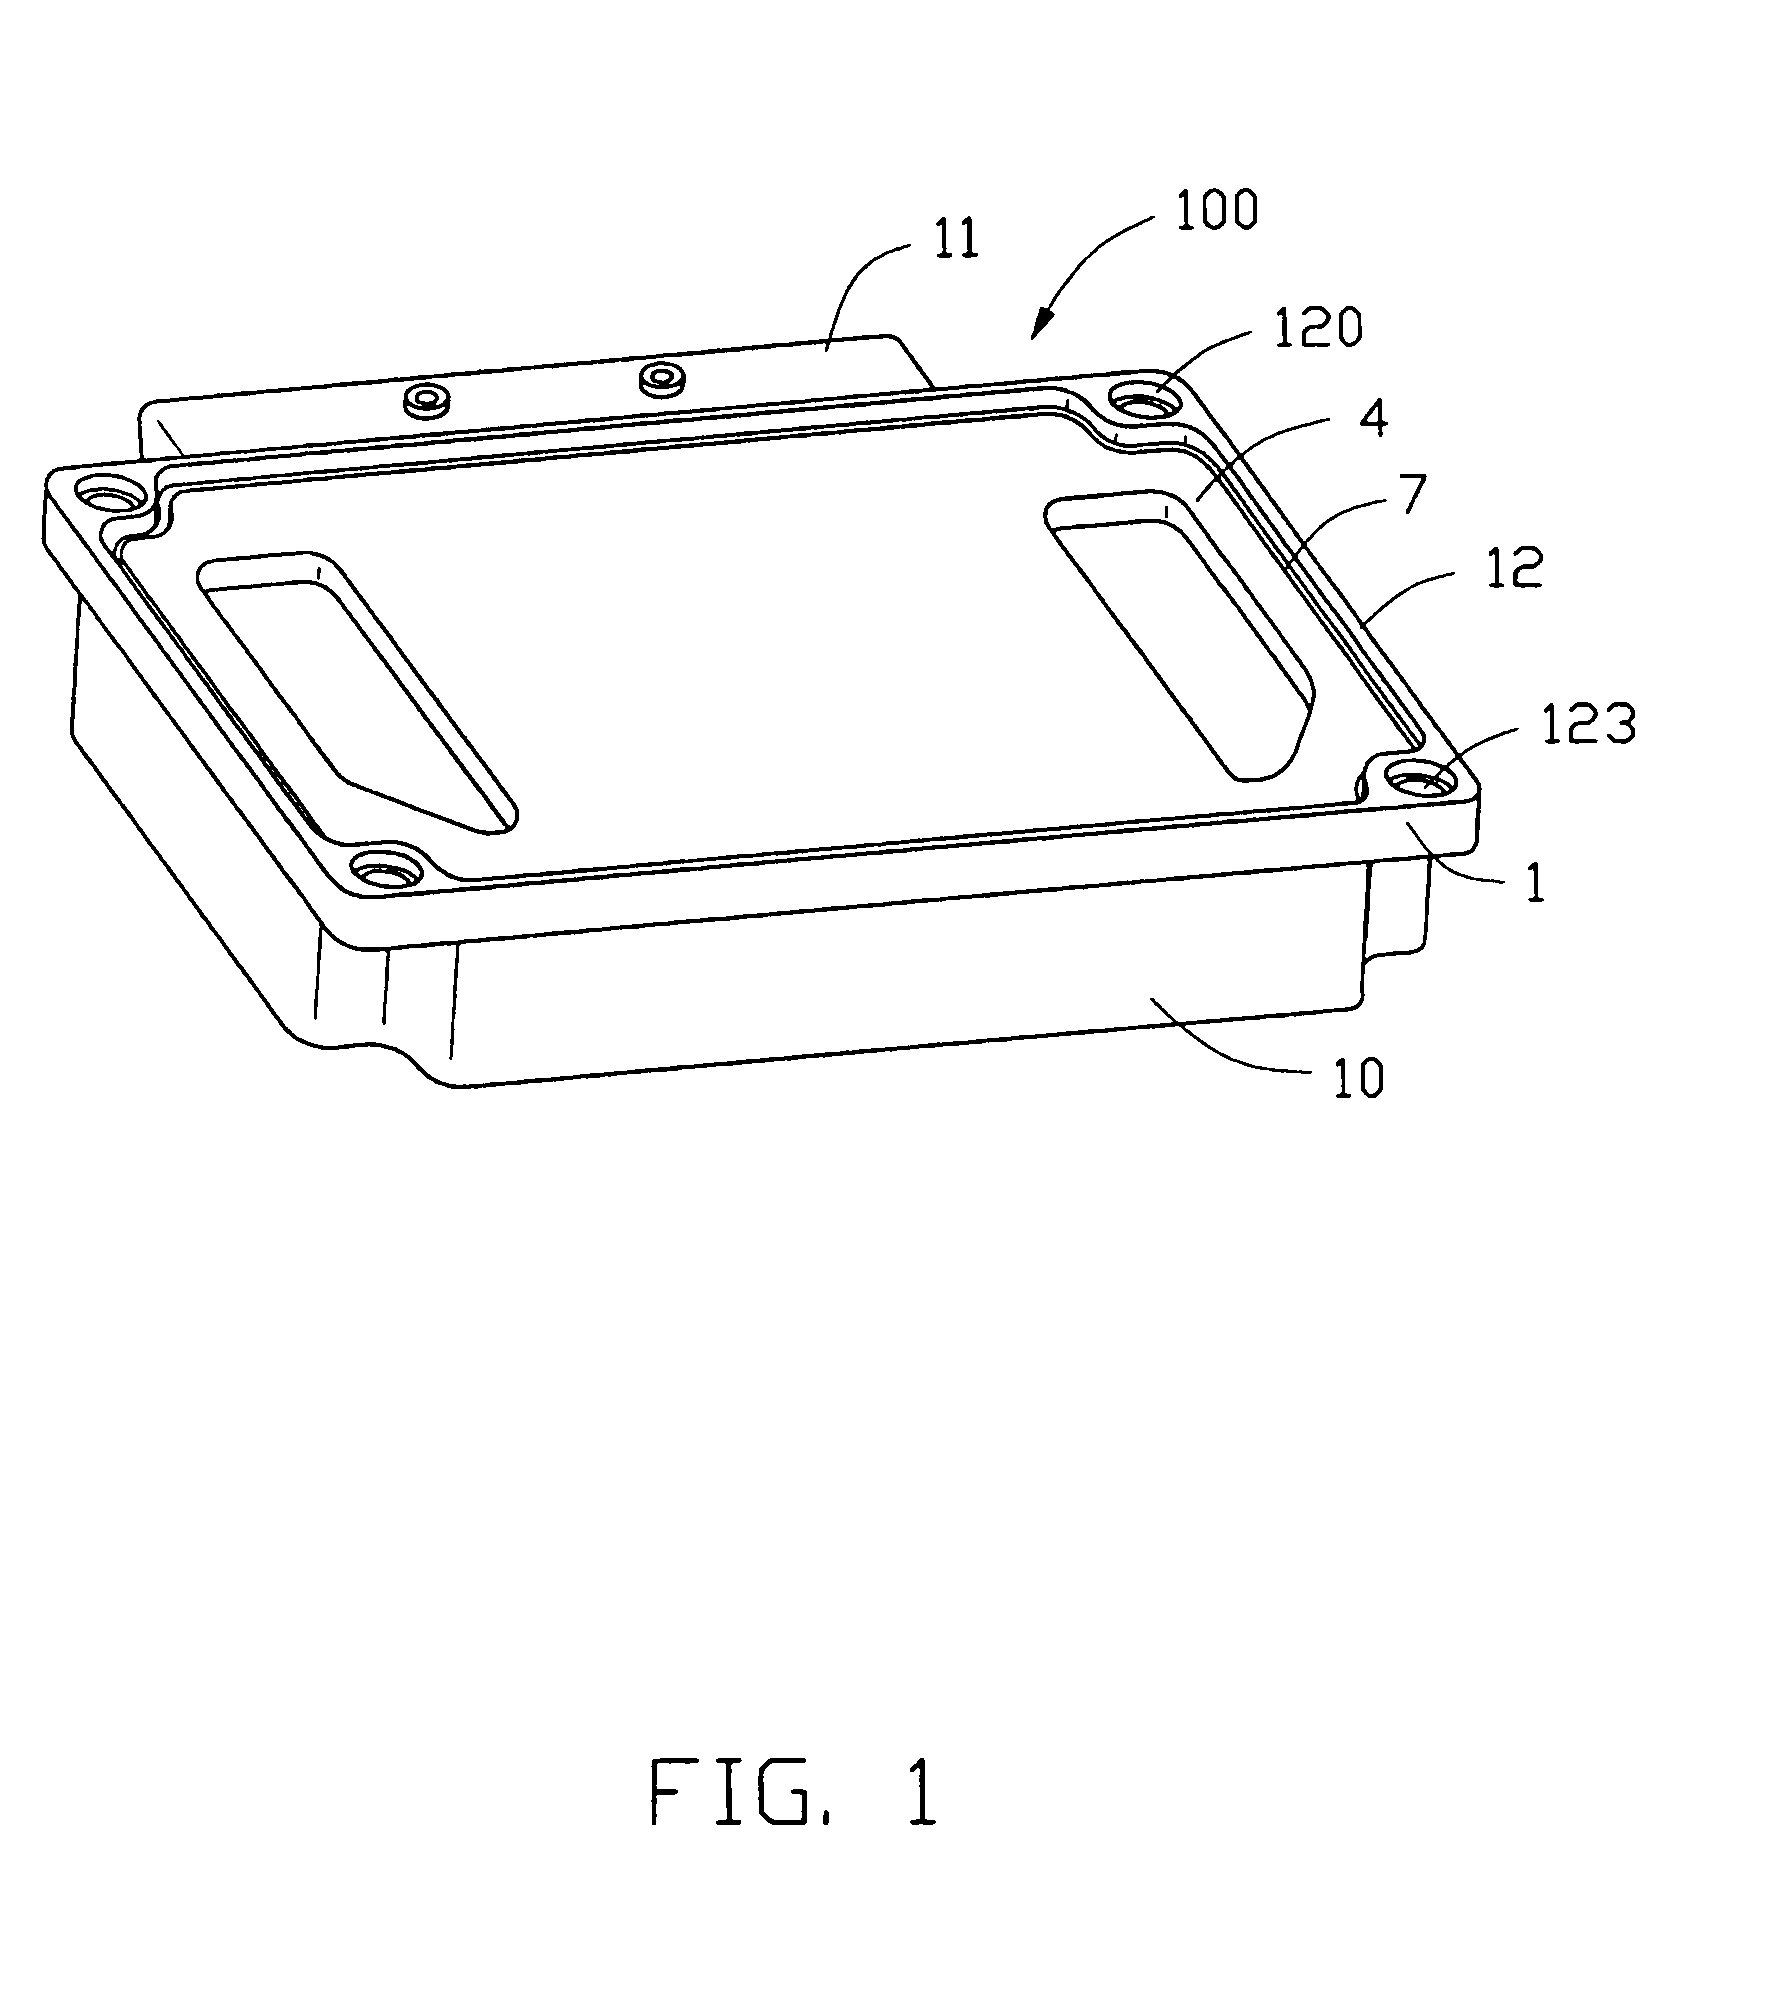 Transmission module assembly having printed circuit board